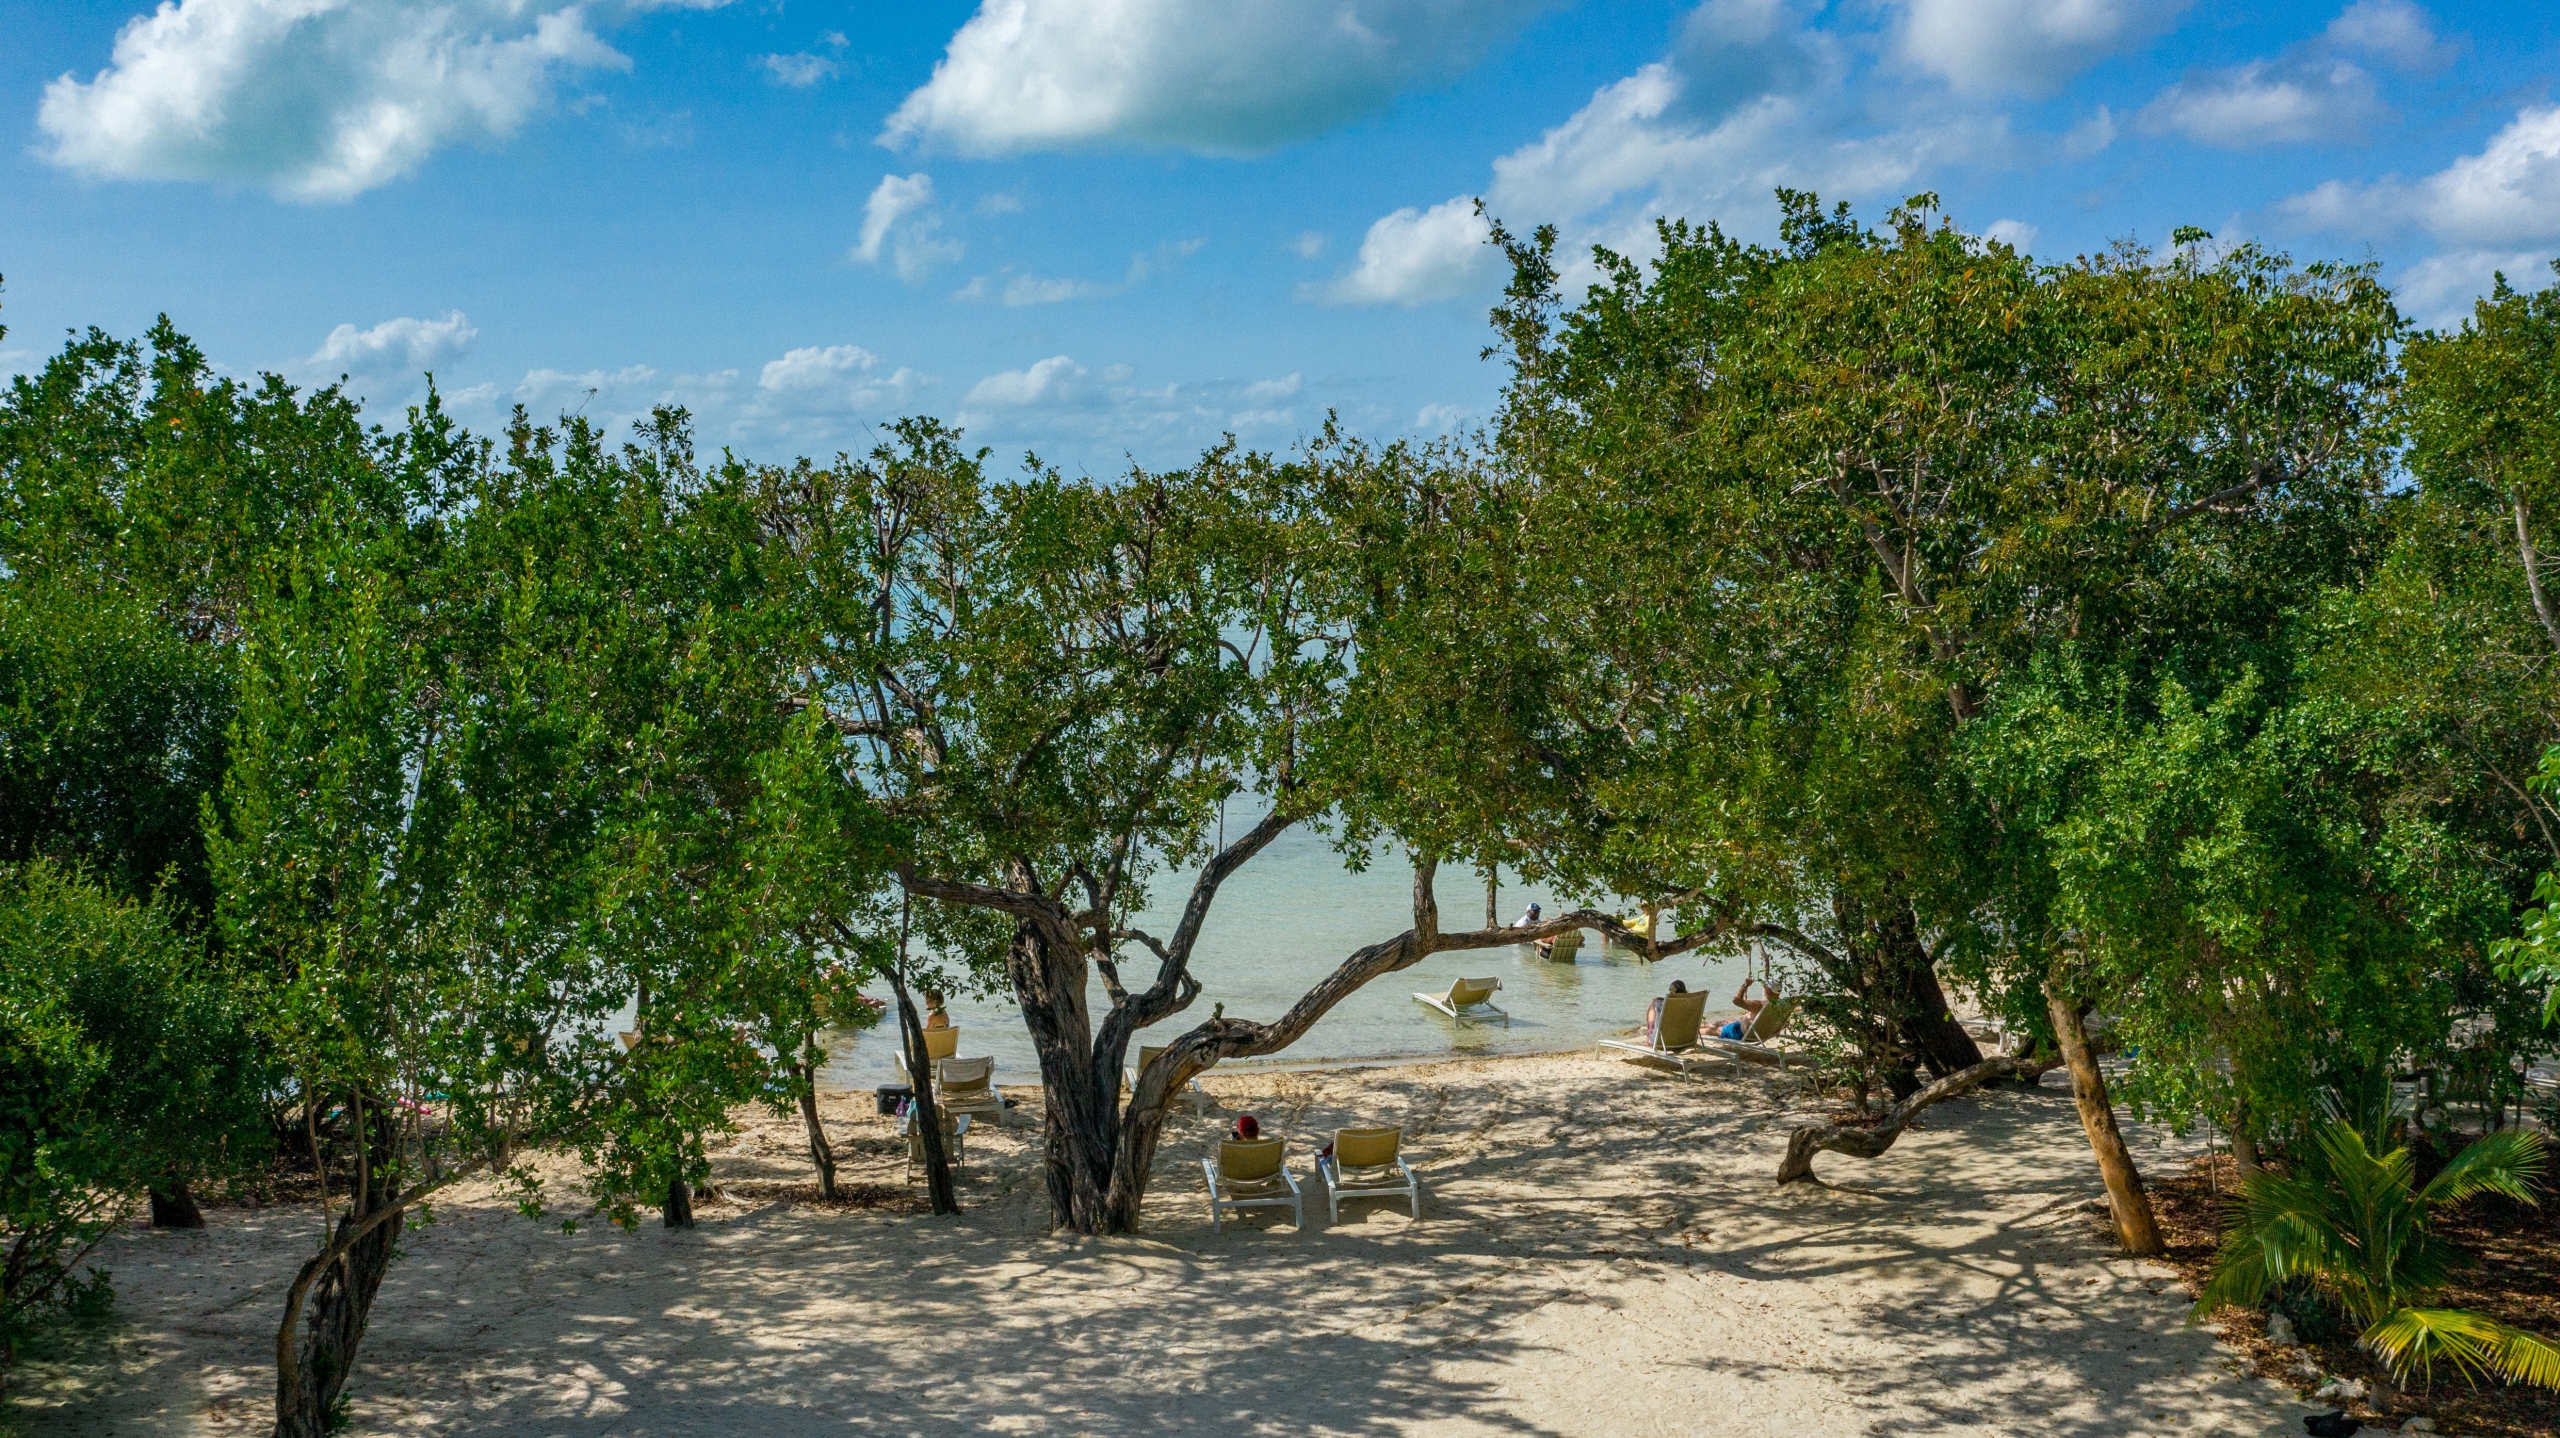 An aerial view of the beach area at Bakers Caye. The beach has lots of large green trees